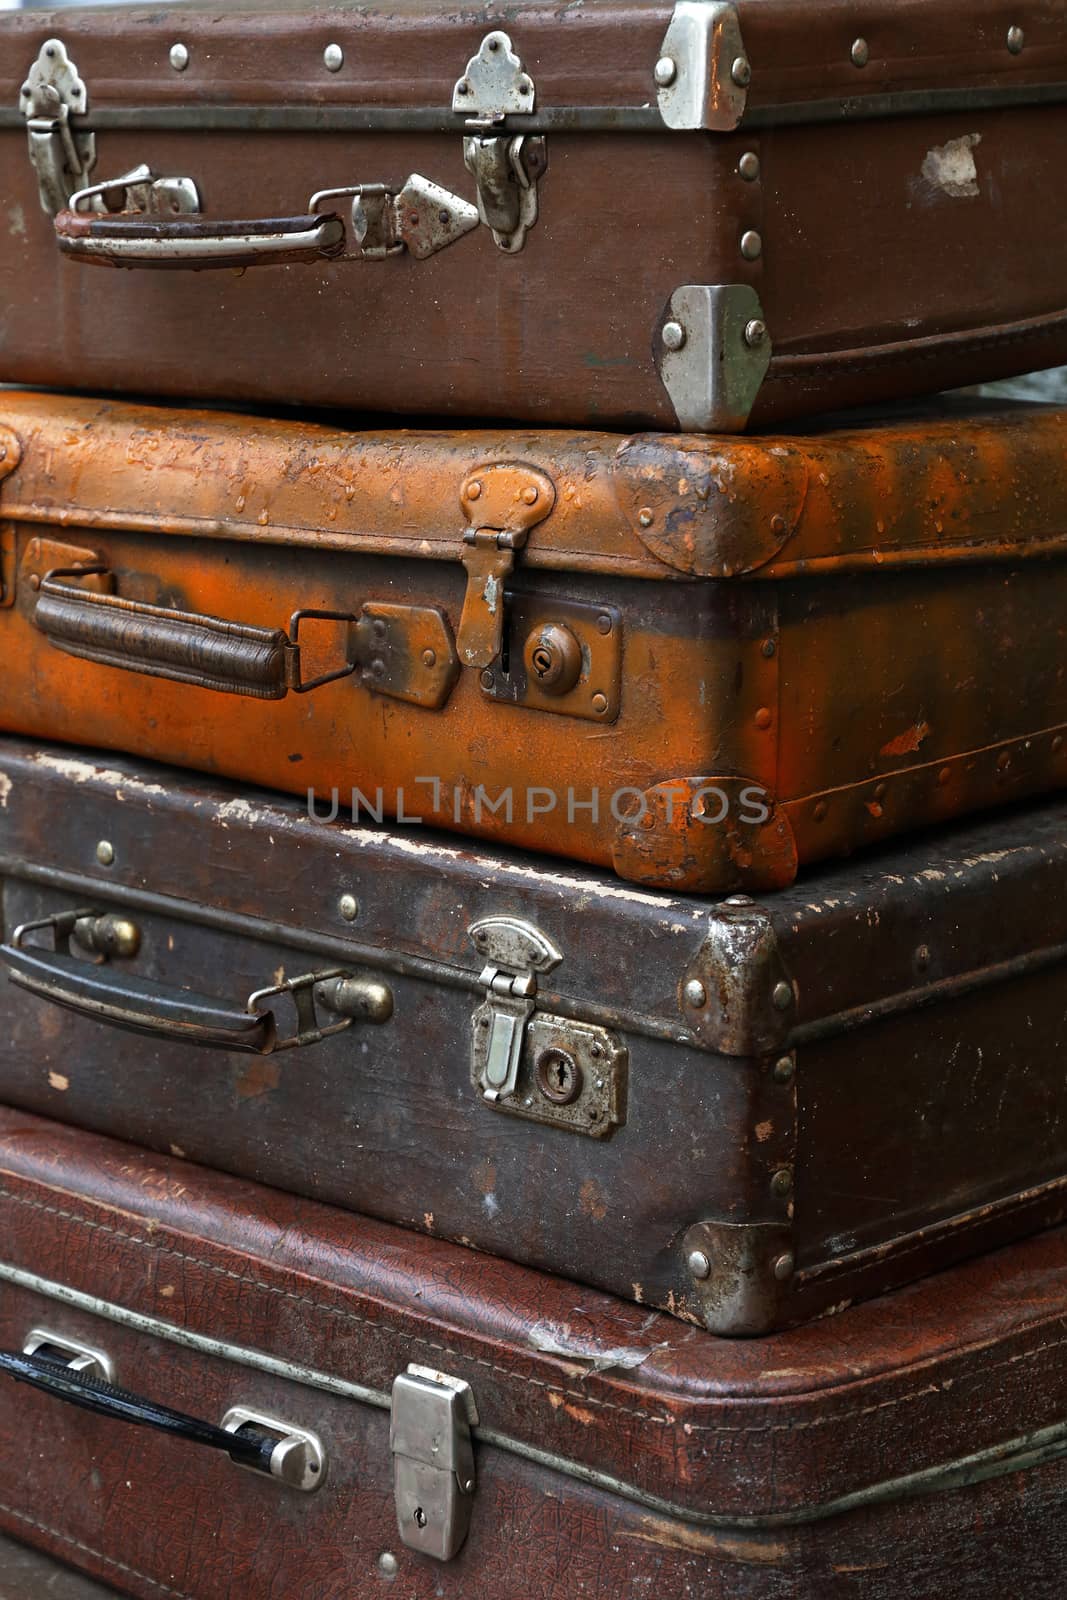 Stack of four old vintage antique grunge travel luggage brown leather suitcase trunks, close up, low angle side view